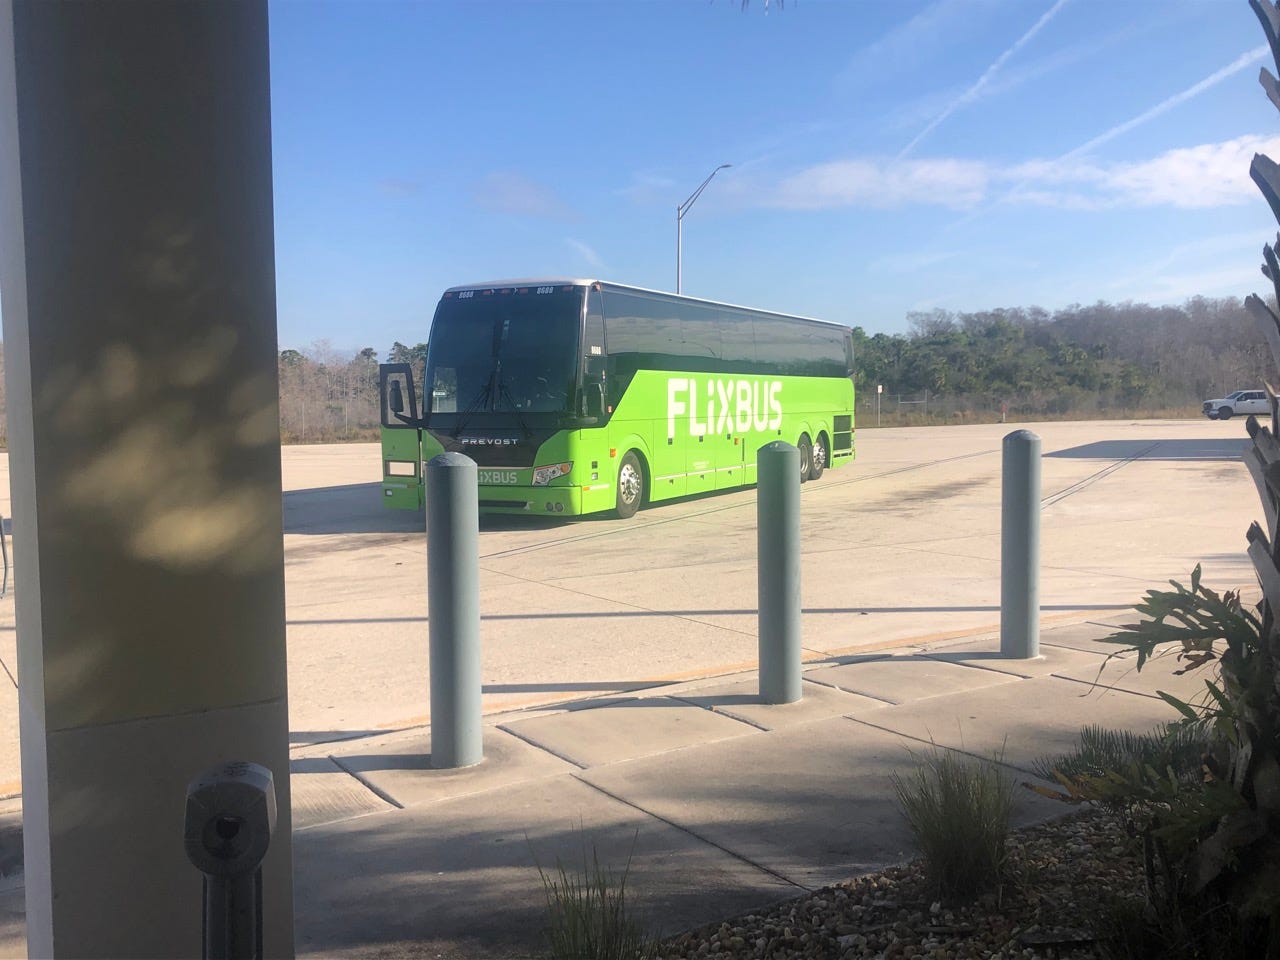 <p>About halfway through the trip, the driver stopped in Alligator Alley, a stretch of highway connecting Naples and Fort Lauderdale.. </p><p>This gave passengers time to use the restroom and get back on the bus before heading to Naples.</p>